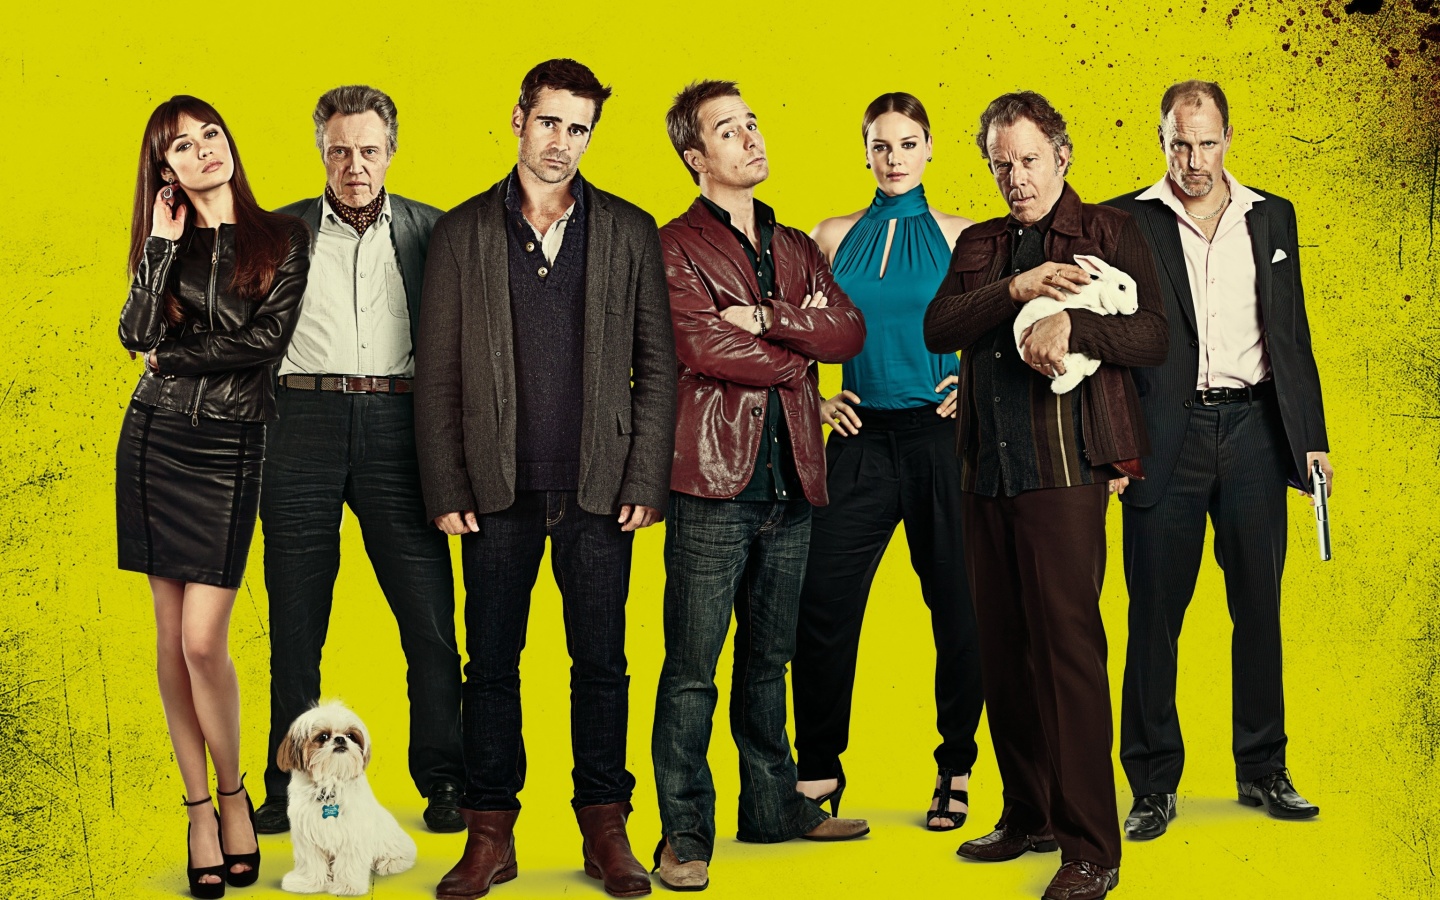 Das Seven Psychopaths with Colin Farrell and Sam Rockwell Wallpaper 1440x900